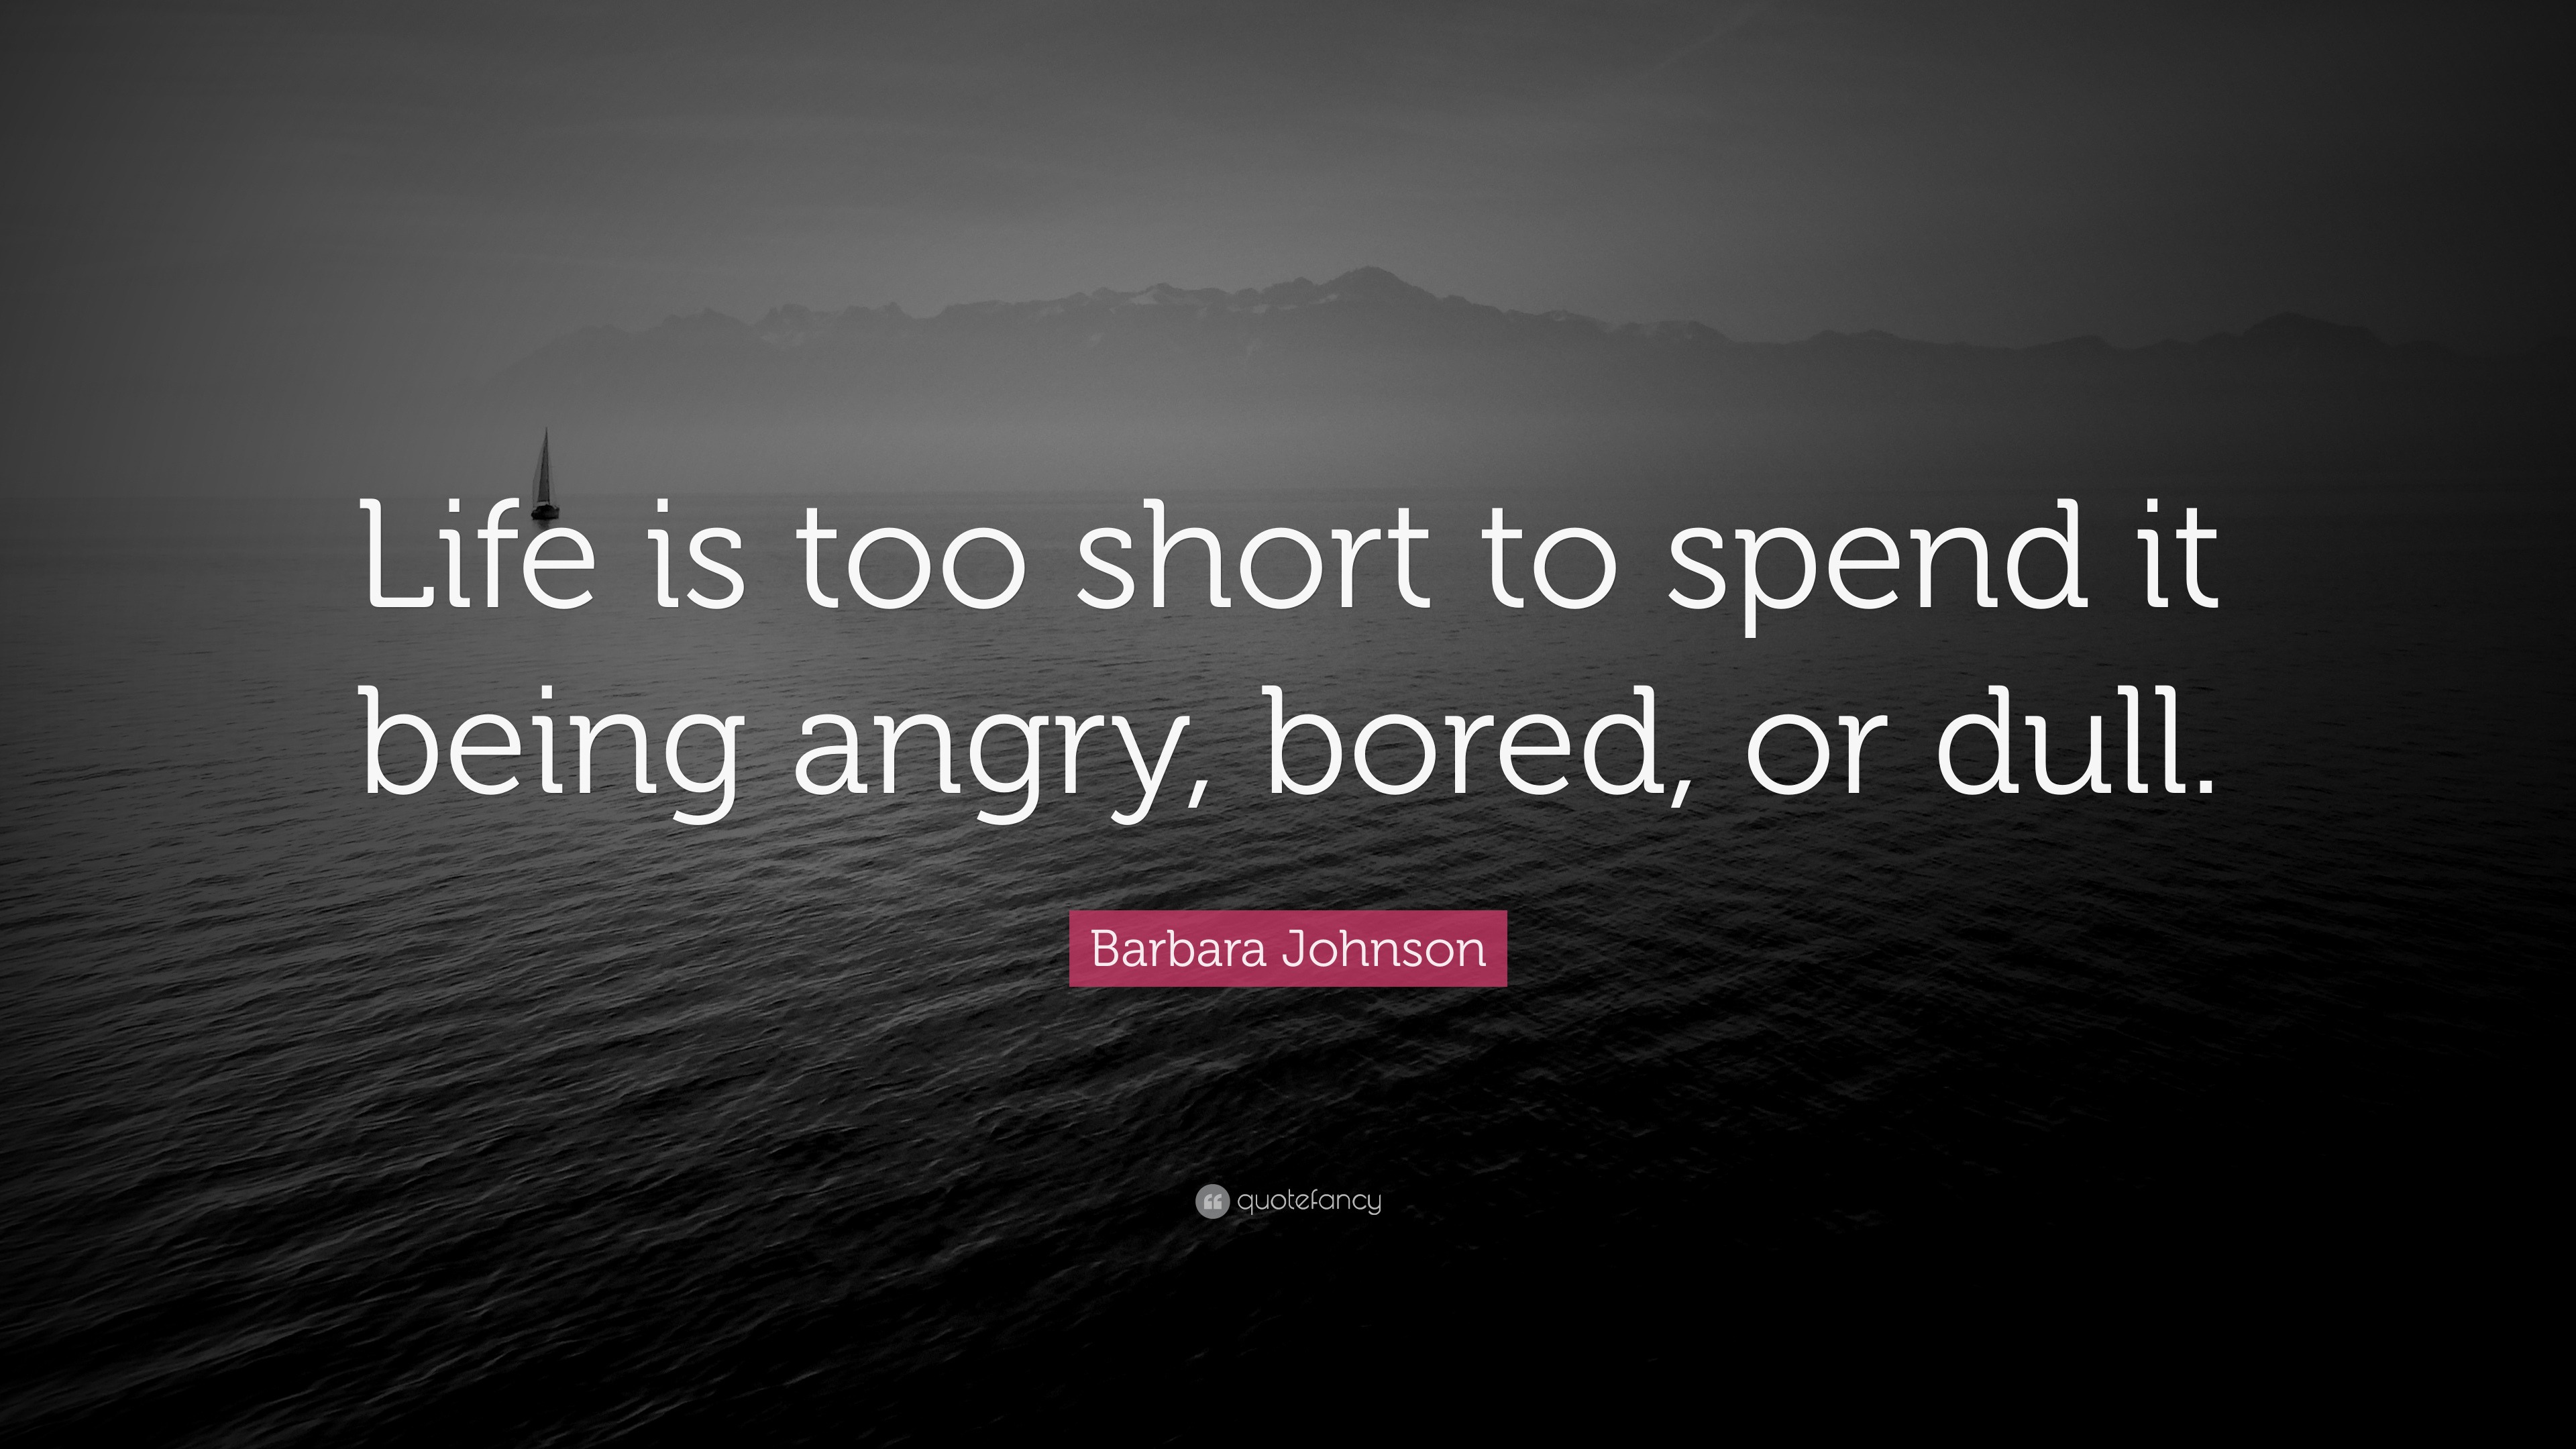 Barbara Johnson Quote “Life is too short to spend it being angry bored